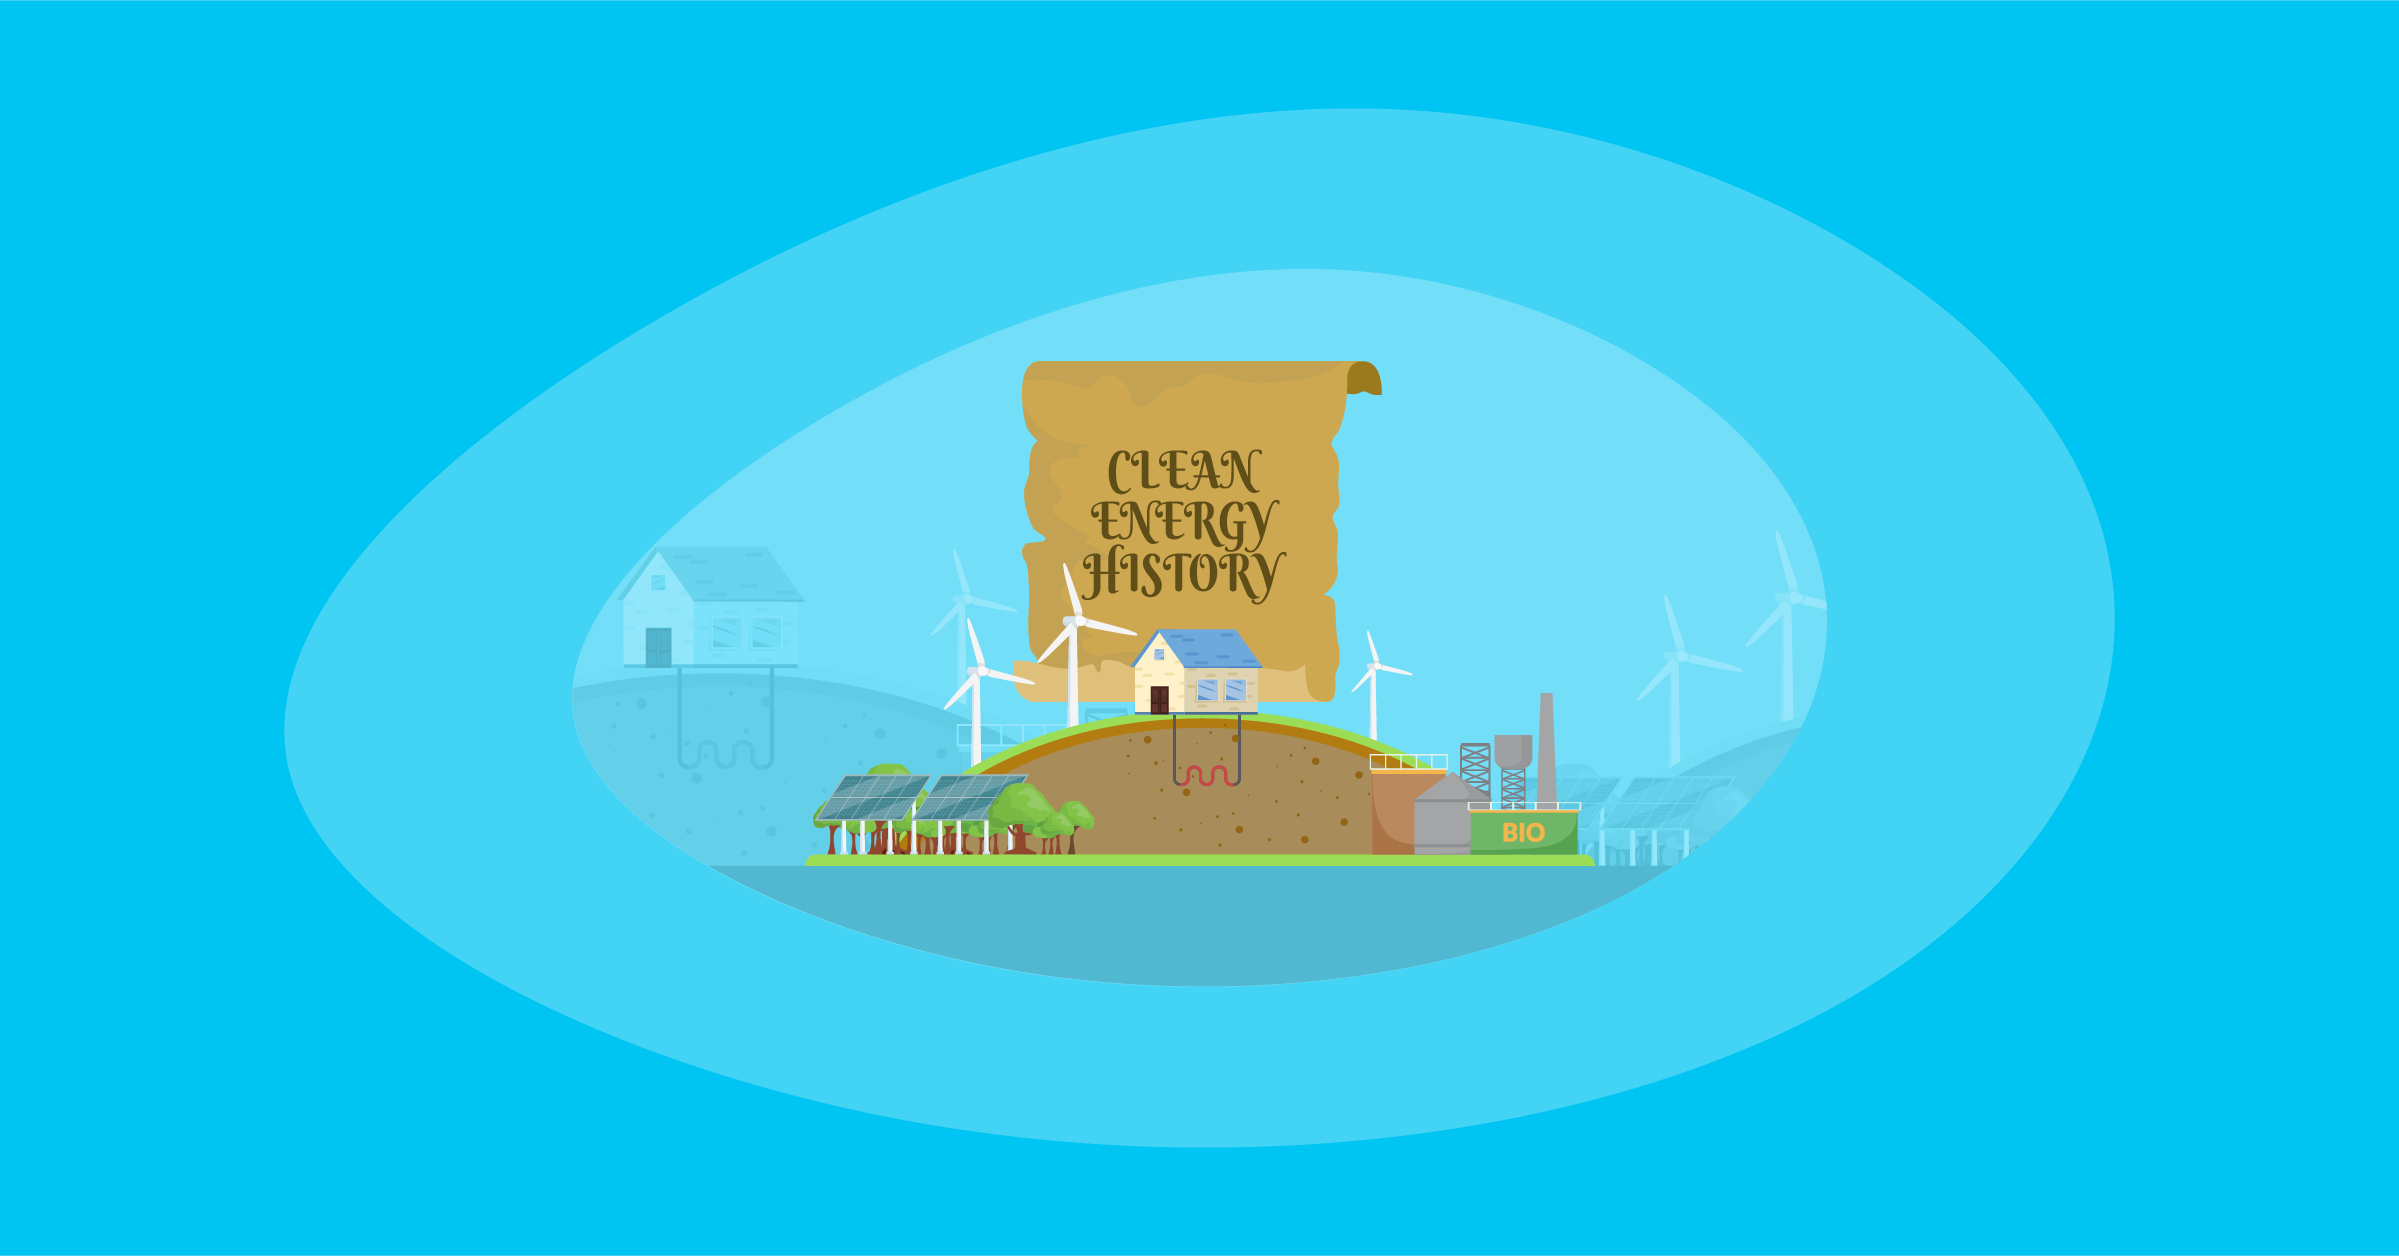 Illustration of clean energy and its history